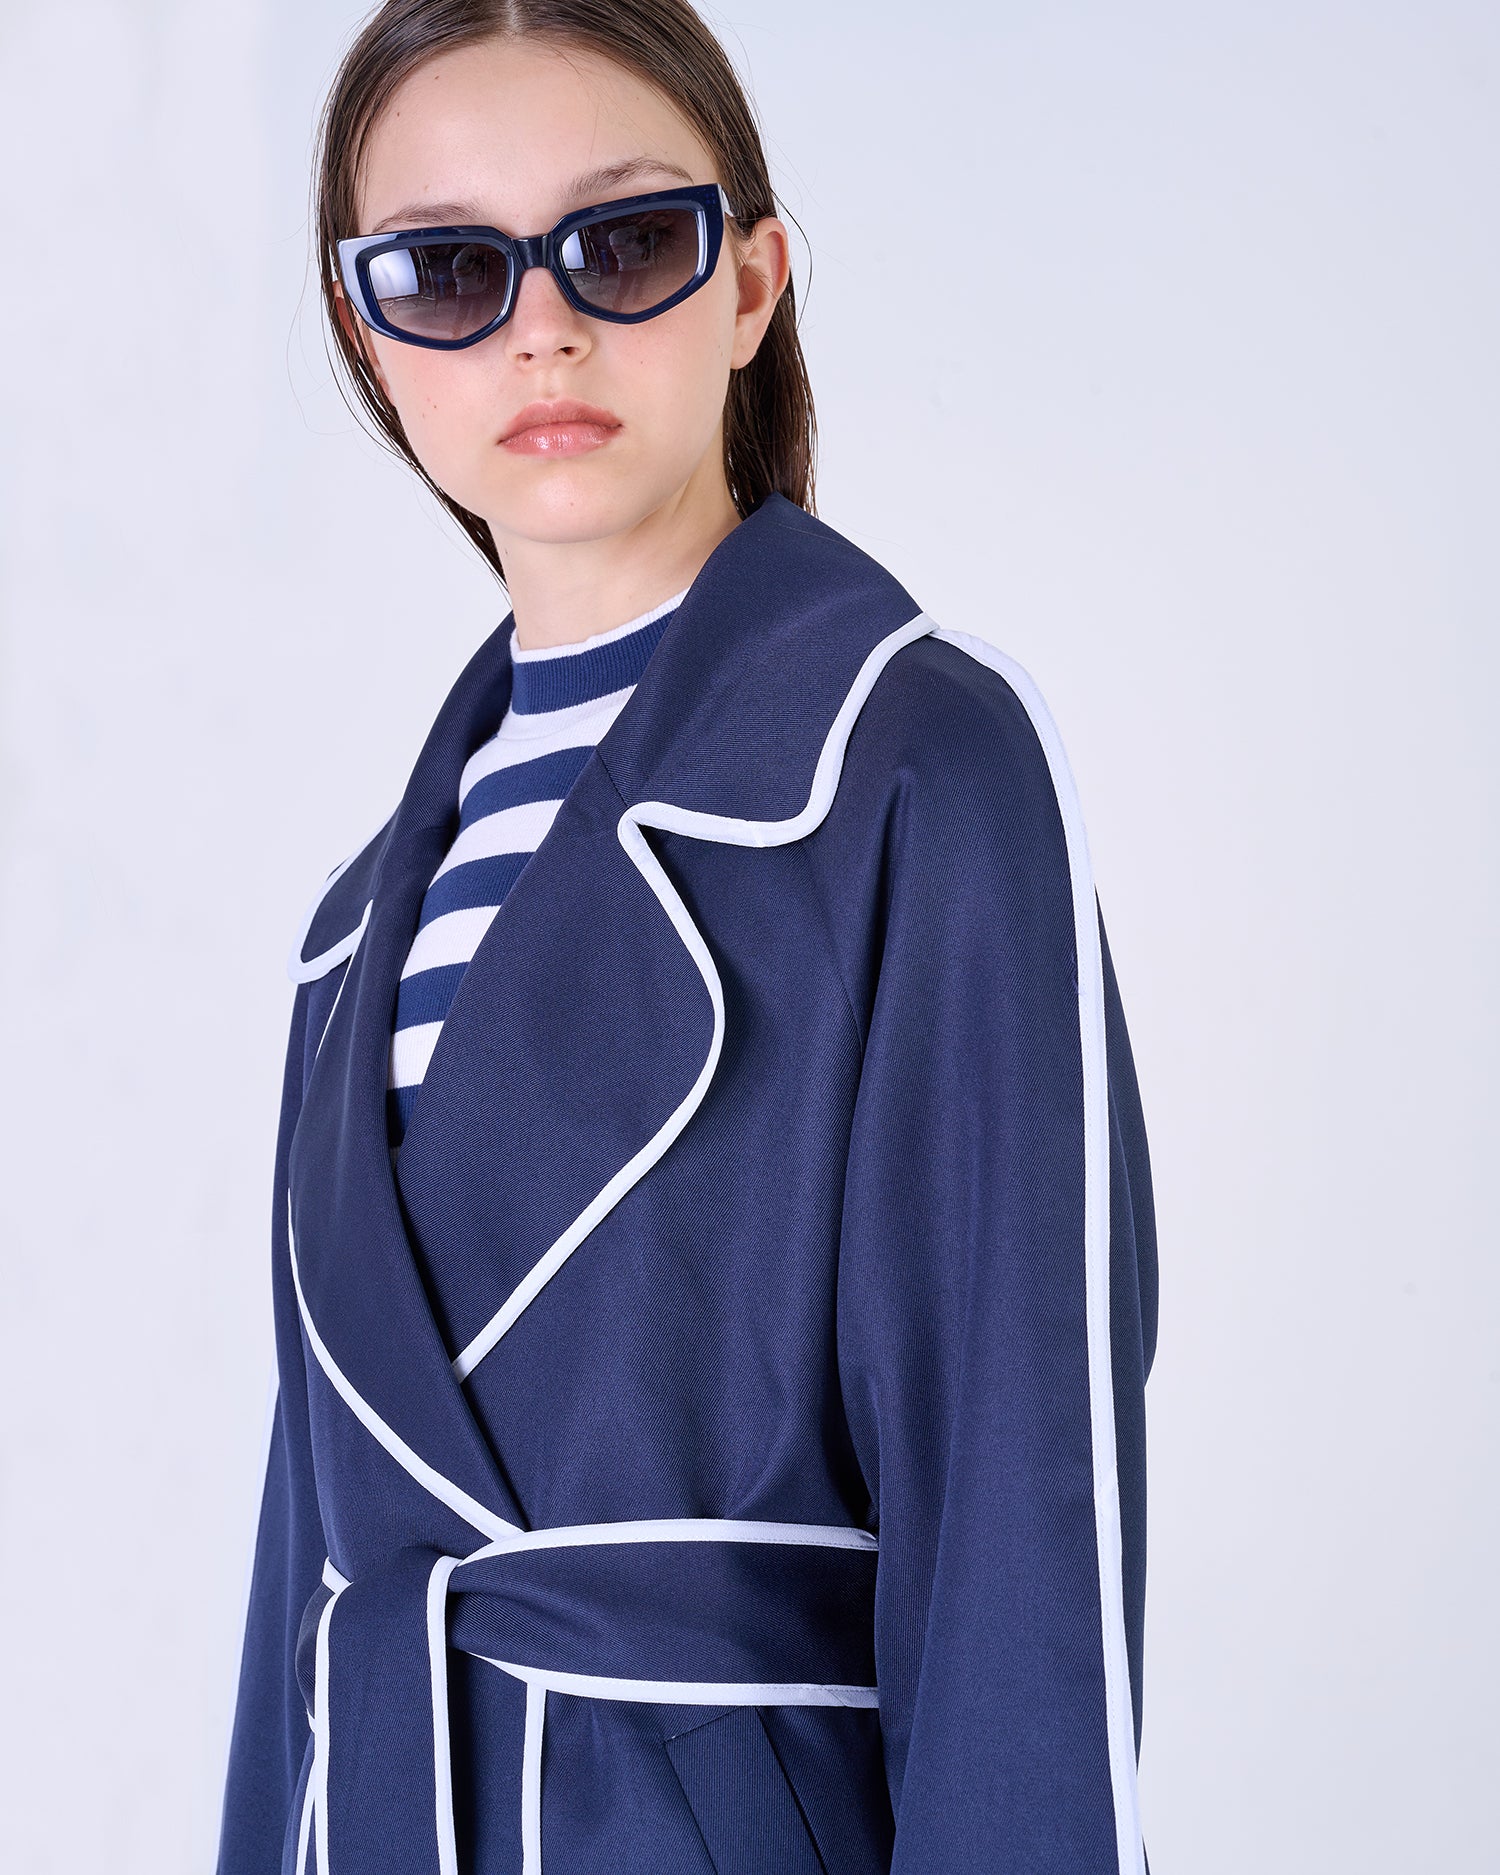 Navy Belted Trench Coat with Contrasting White Piping - Si Jolie